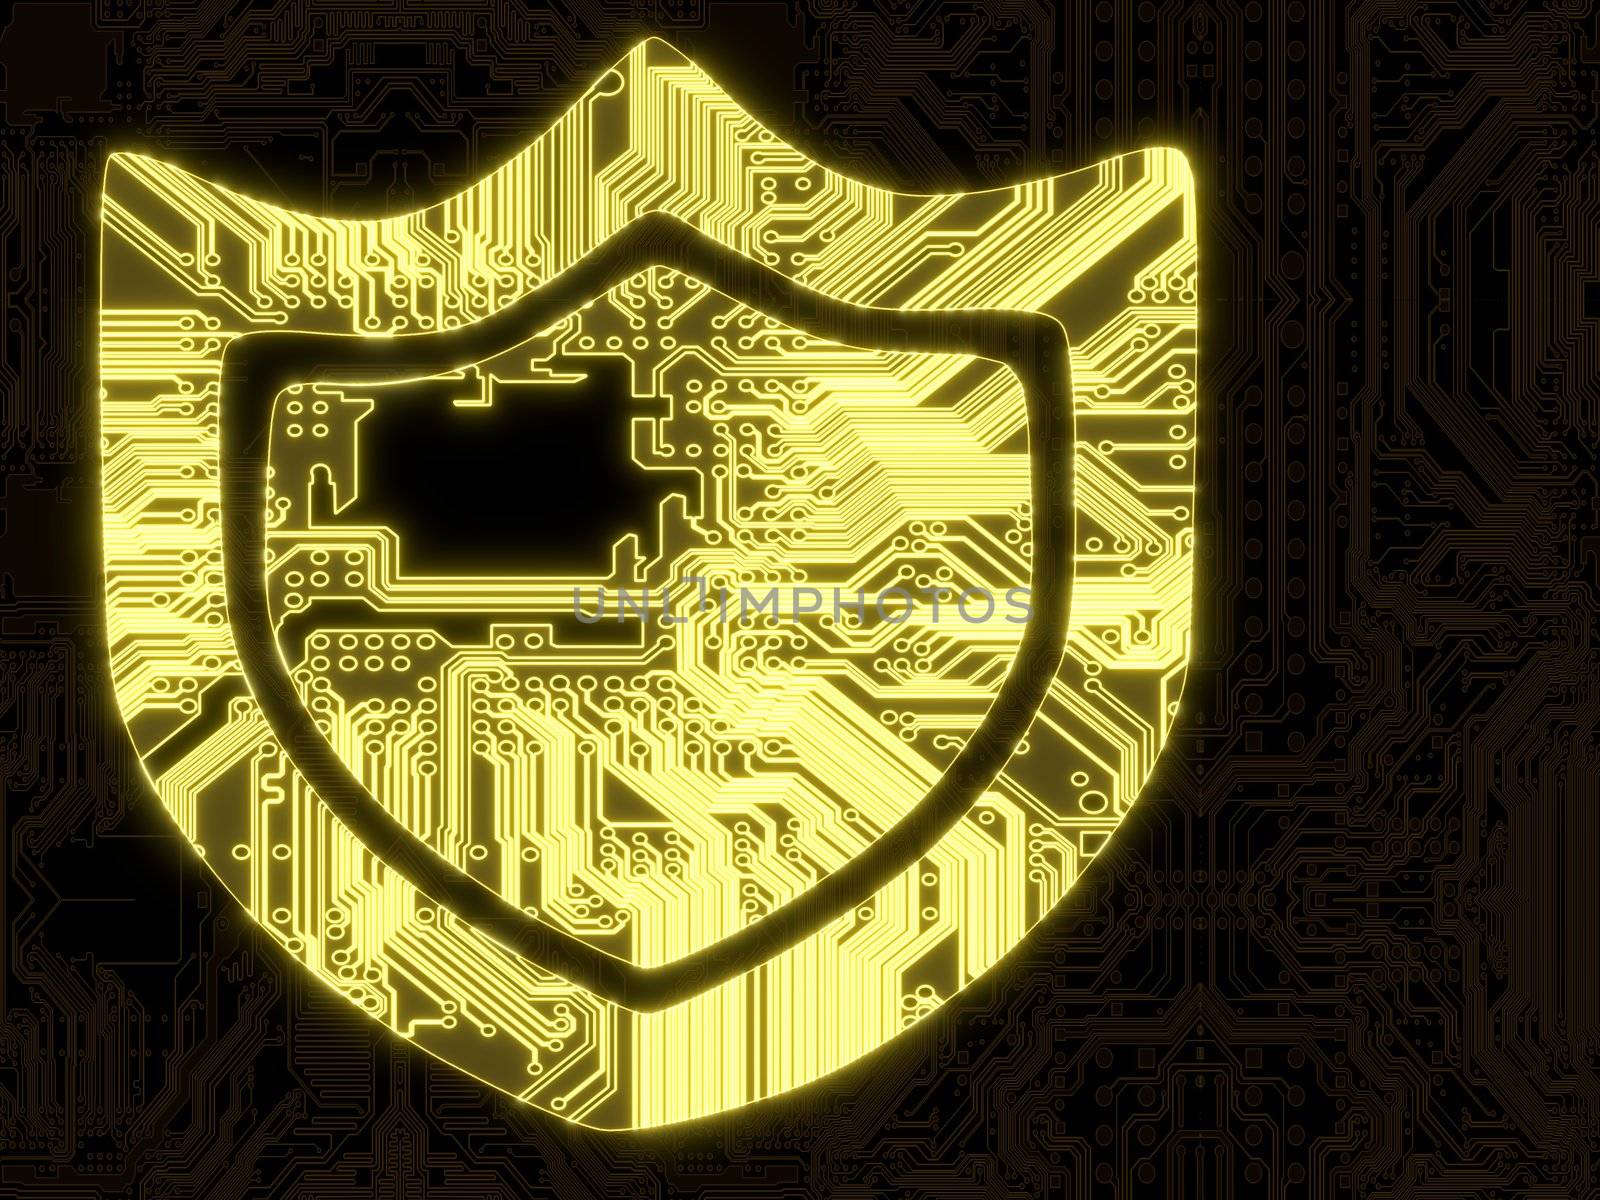 Glowing yellow protection symbol on a computer chip by onirb